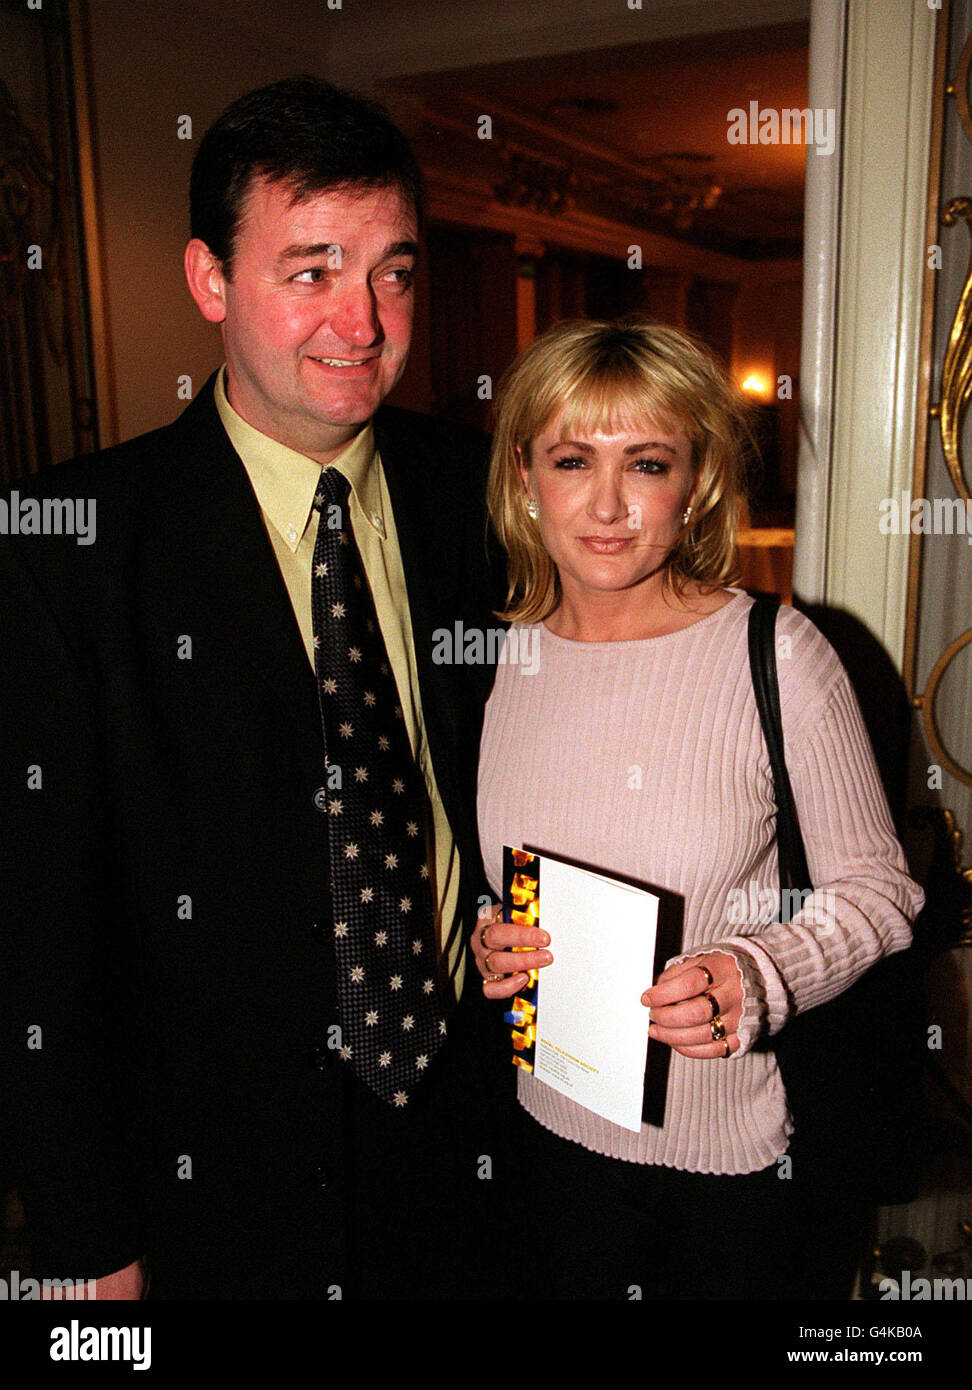 Actors Caroline Aherne and Craig Cash, who starred as mother and son in the BBC-1 comedy series 'Mrs Merton and Malcolm', at the Royal Television Society Programme Awards at London's Grosvenor House Hotel. Stock Photo